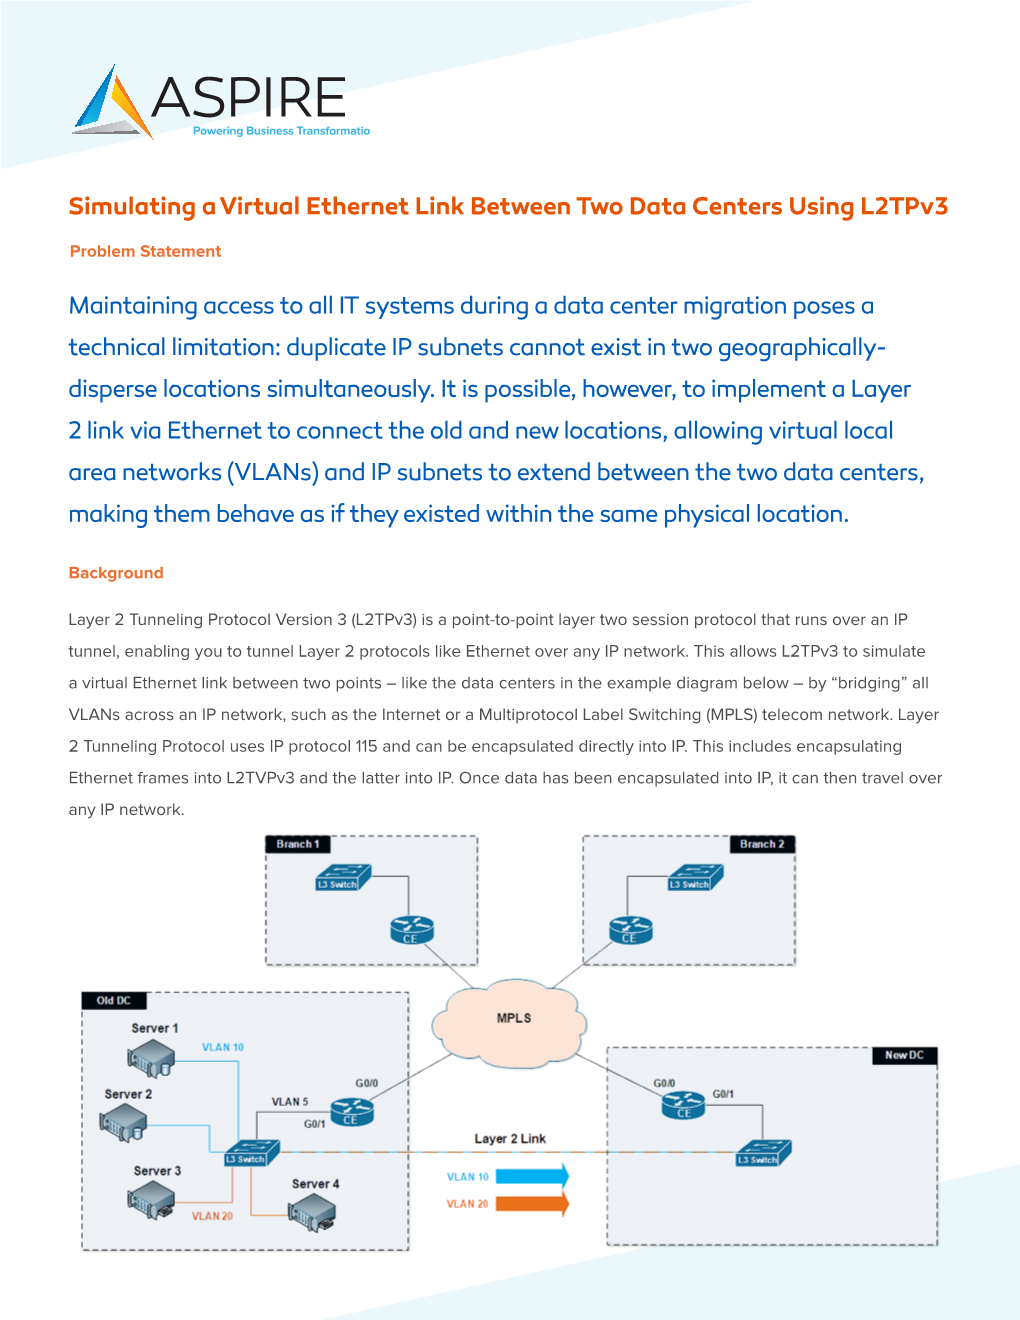 Duplicate IP Subnets Cannot Exist in Two Geographically- Disperse Locations Simultaneously